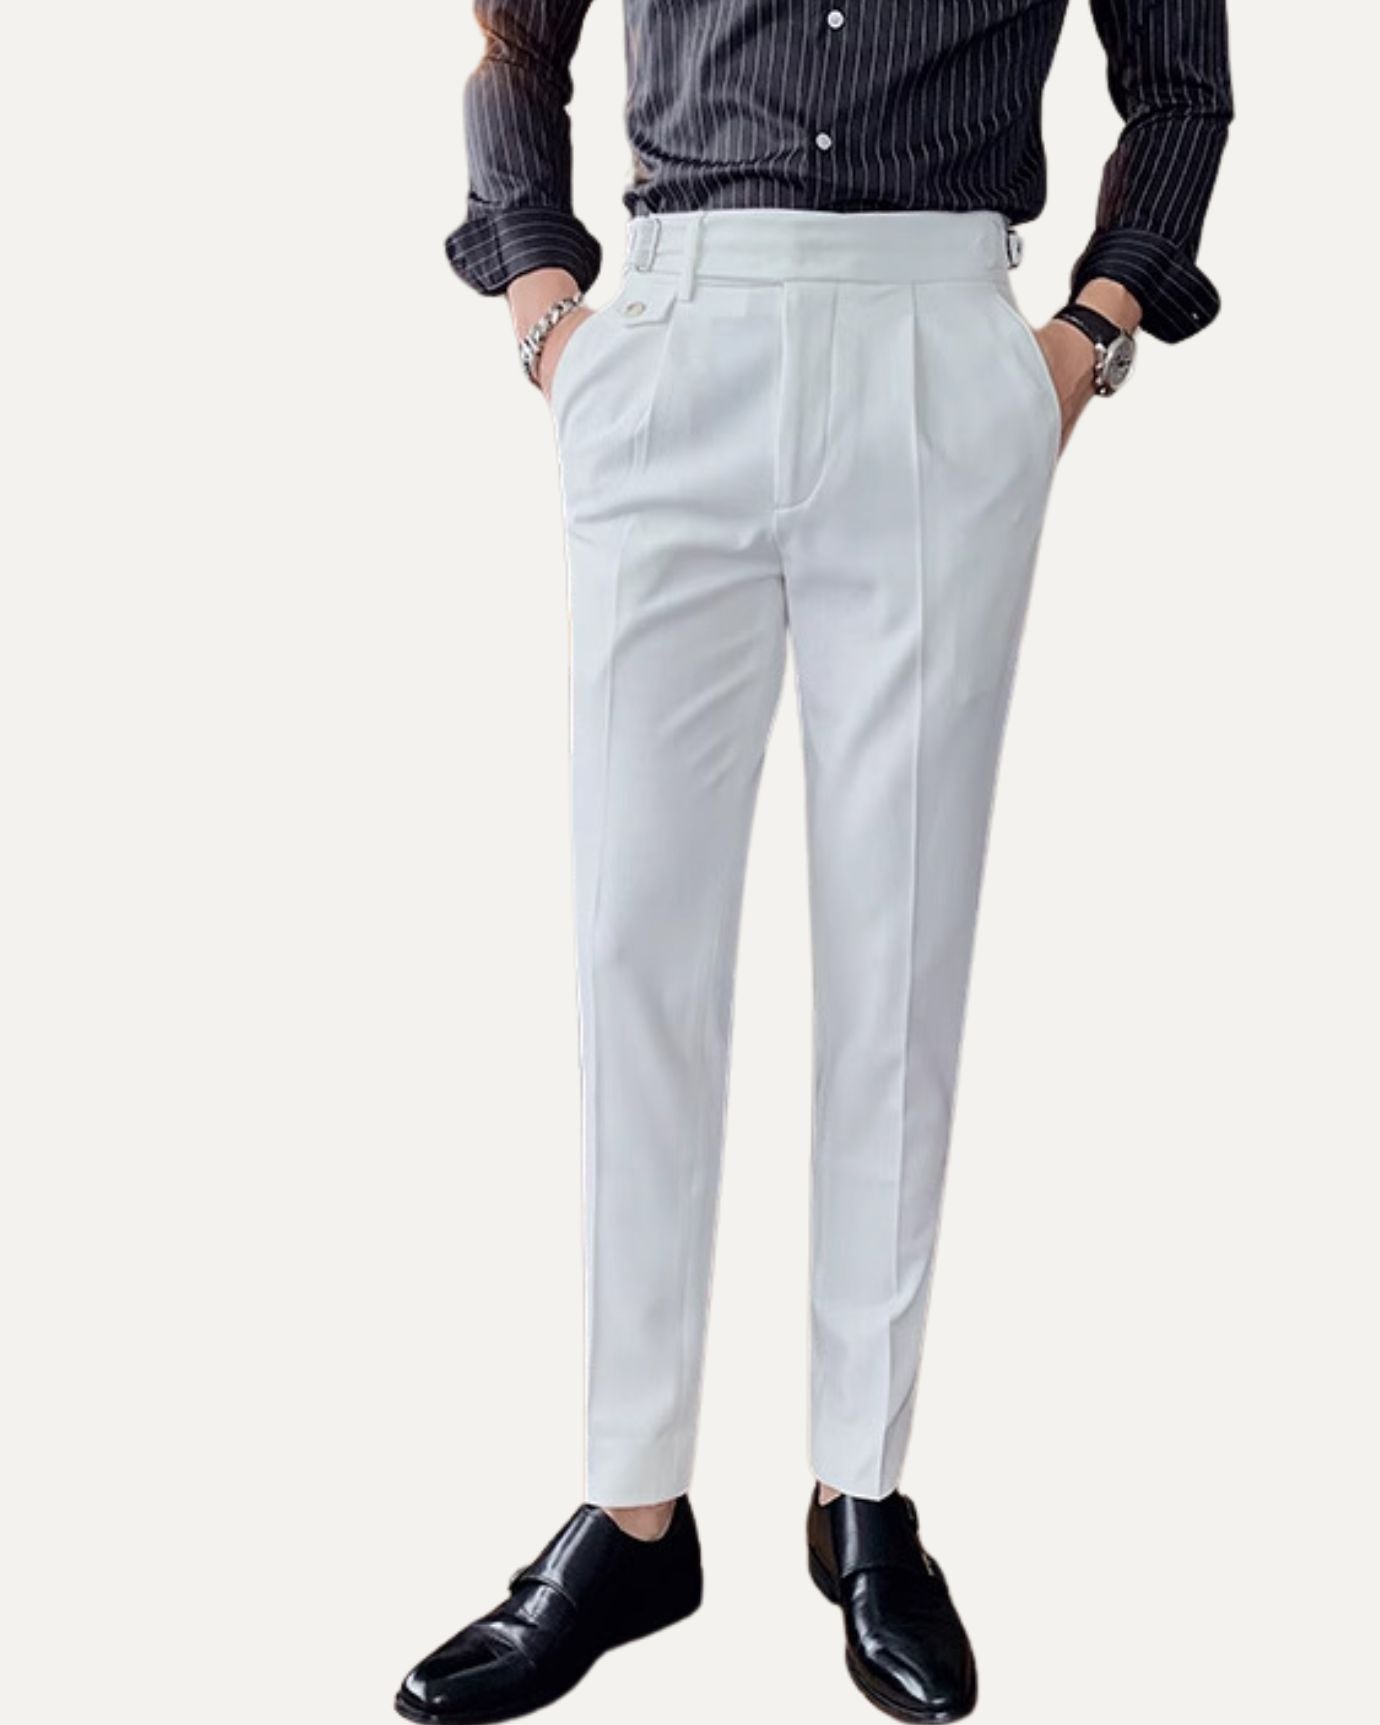 Lovau Old Money Business Trousers